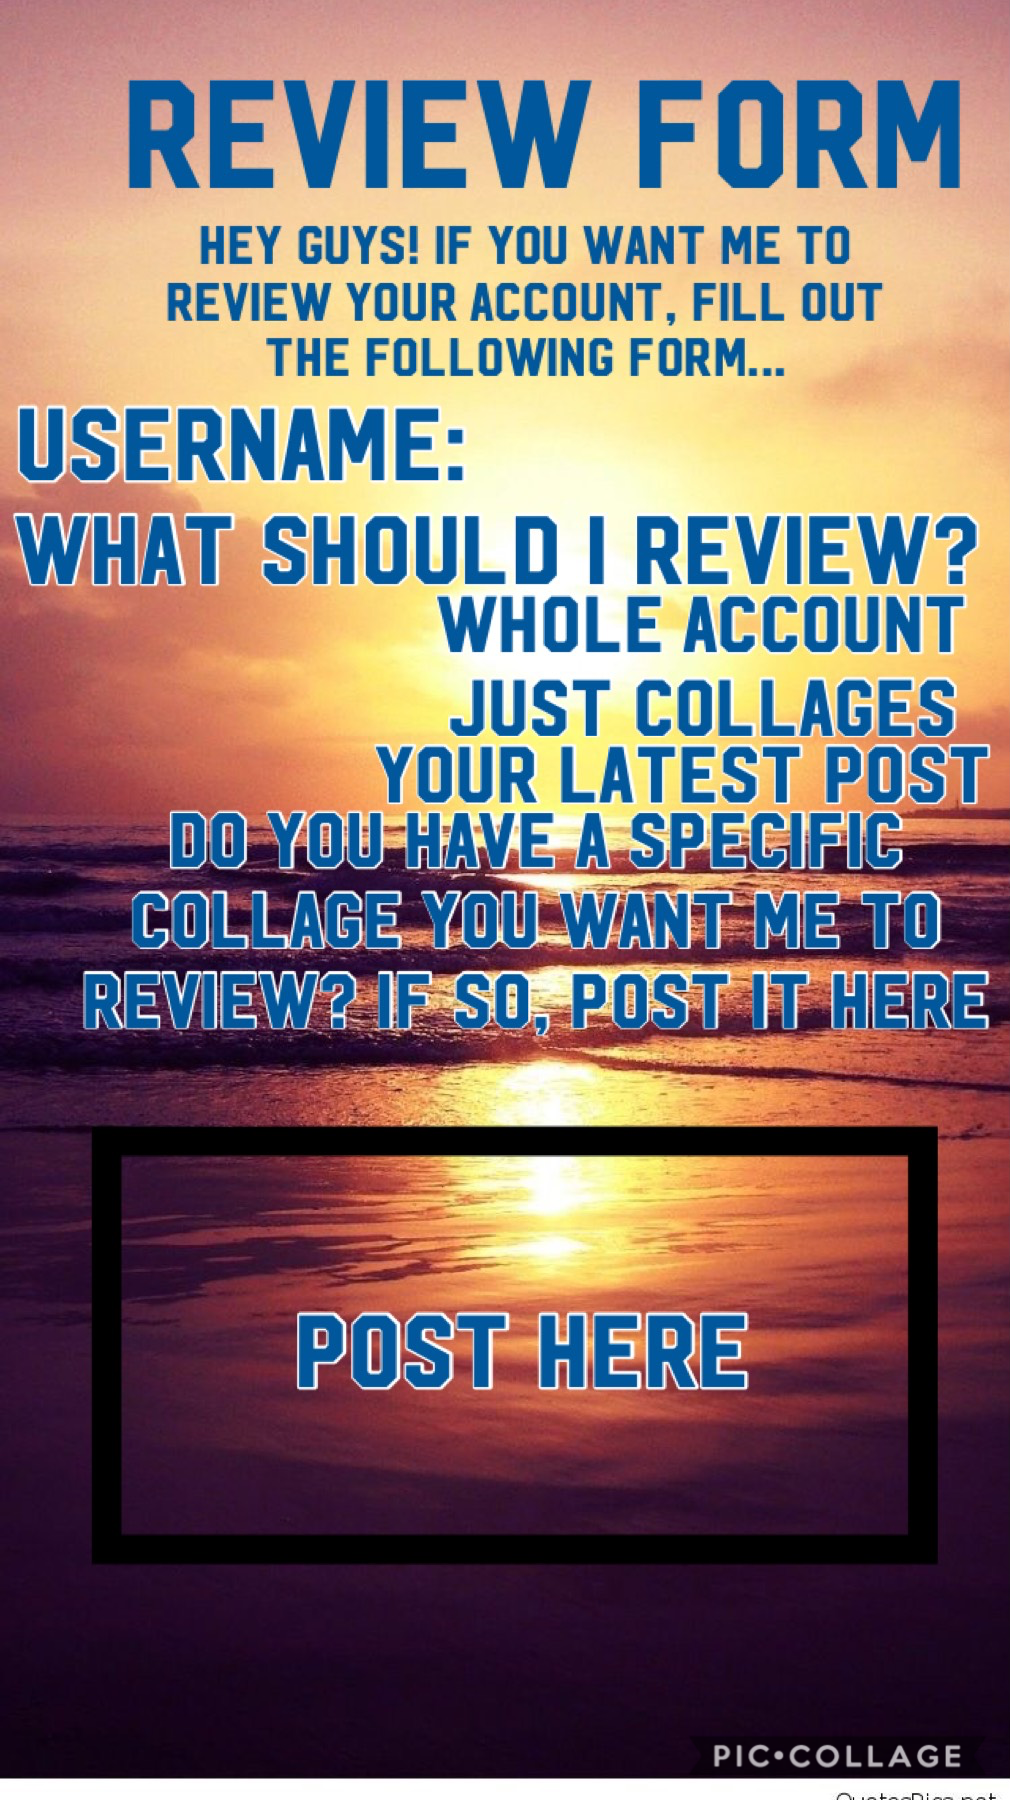 Want an account review?